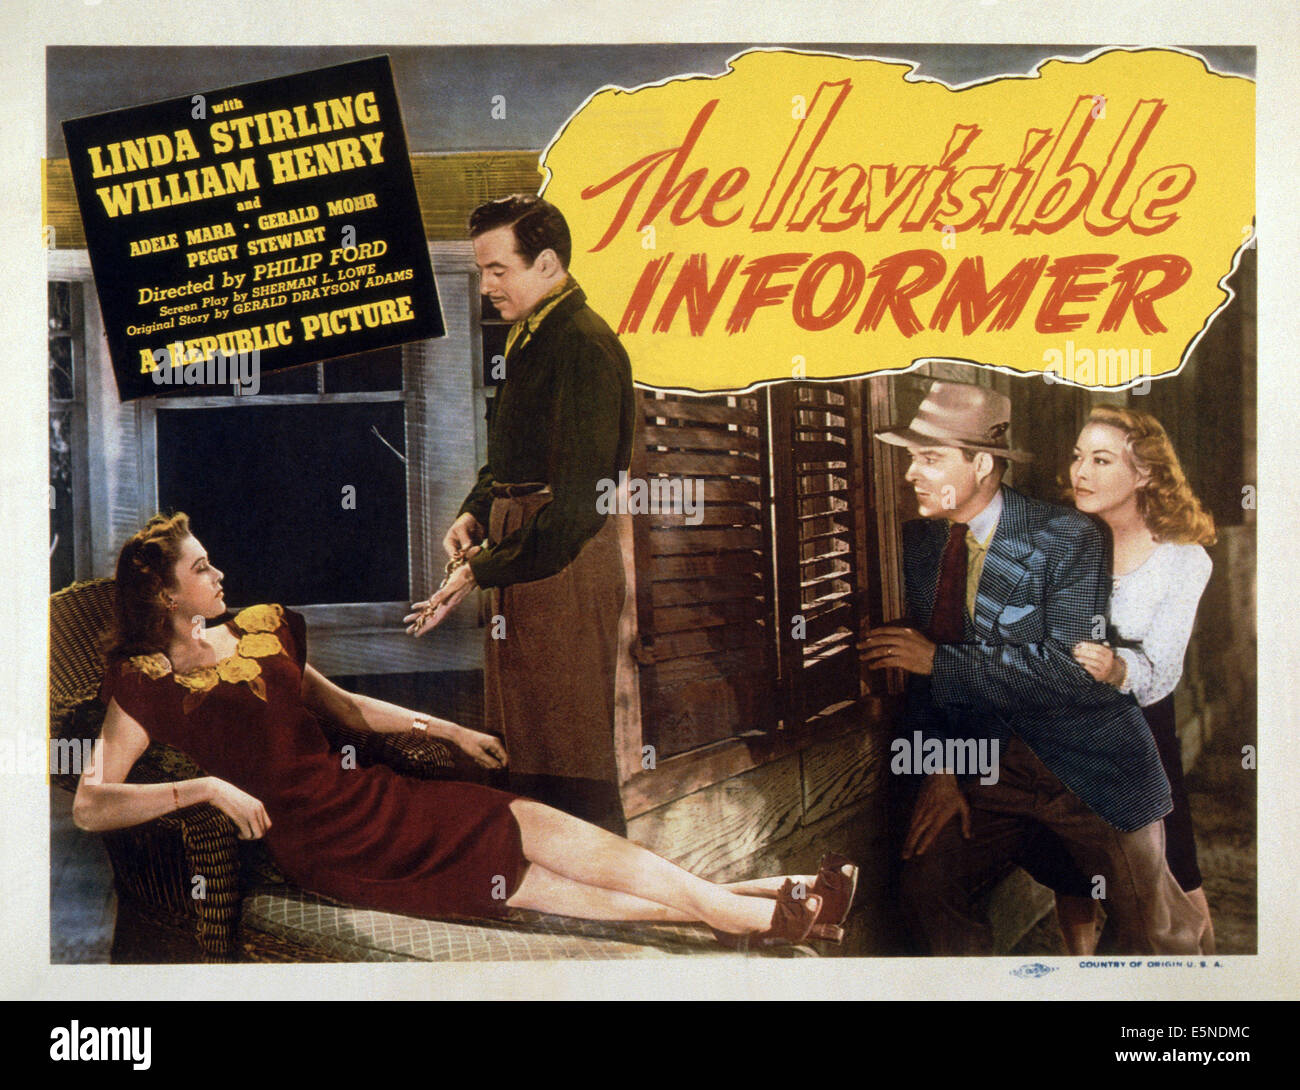 THE INVISIBLE INFORMER, from left: Linda Stirling, Gerald Mohr, William Henry, Adele Mara, 1946 Stock Photo